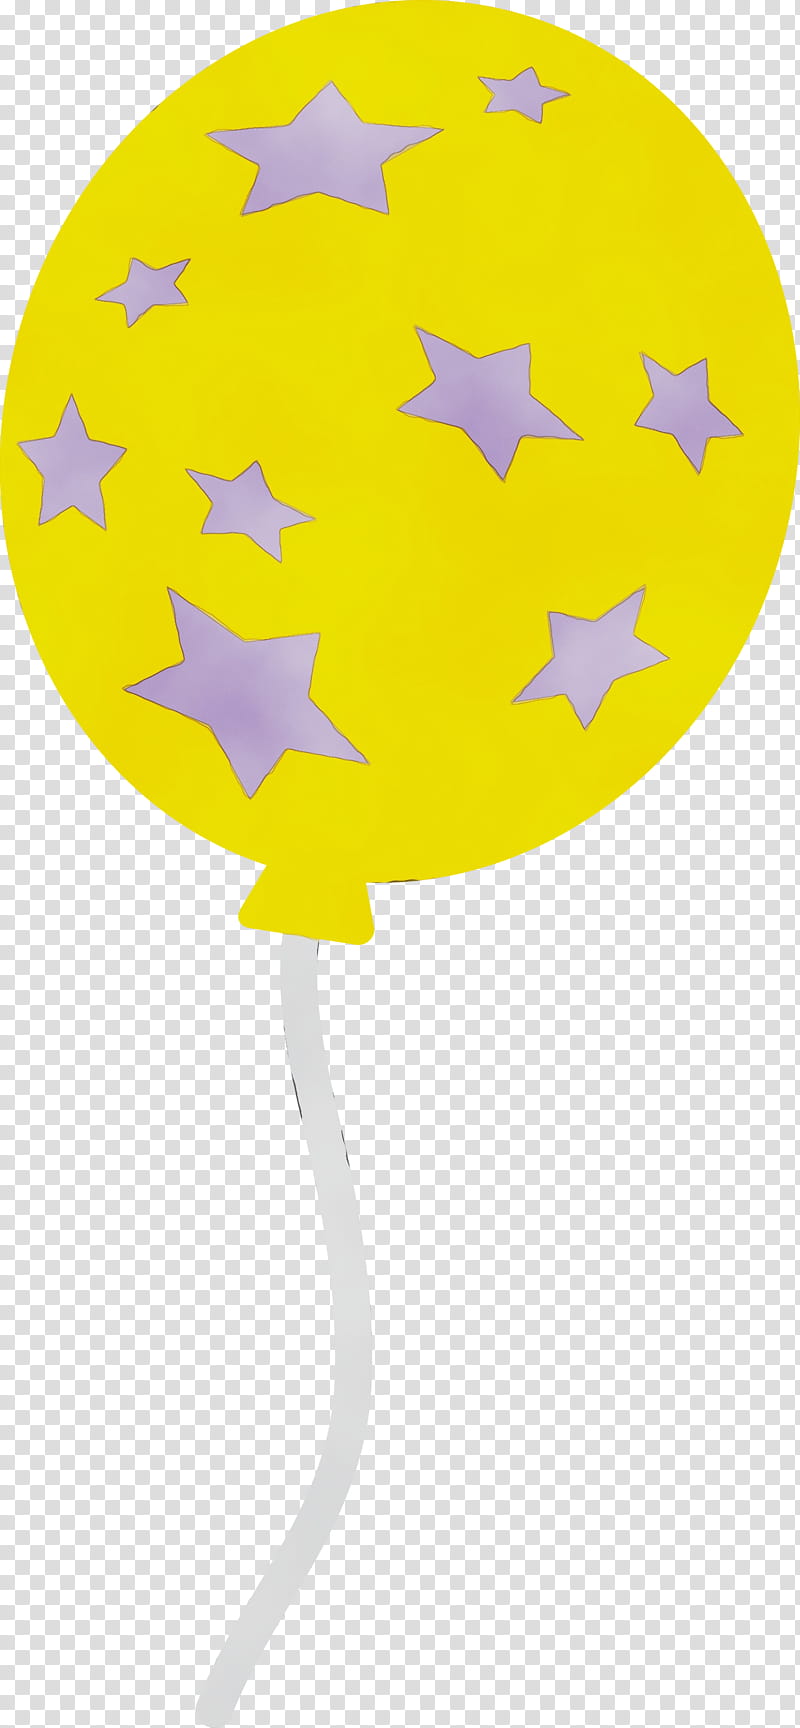 yellow tree, Balloon, Watercolor, Paint, Wet Ink transparent background PNG clipart